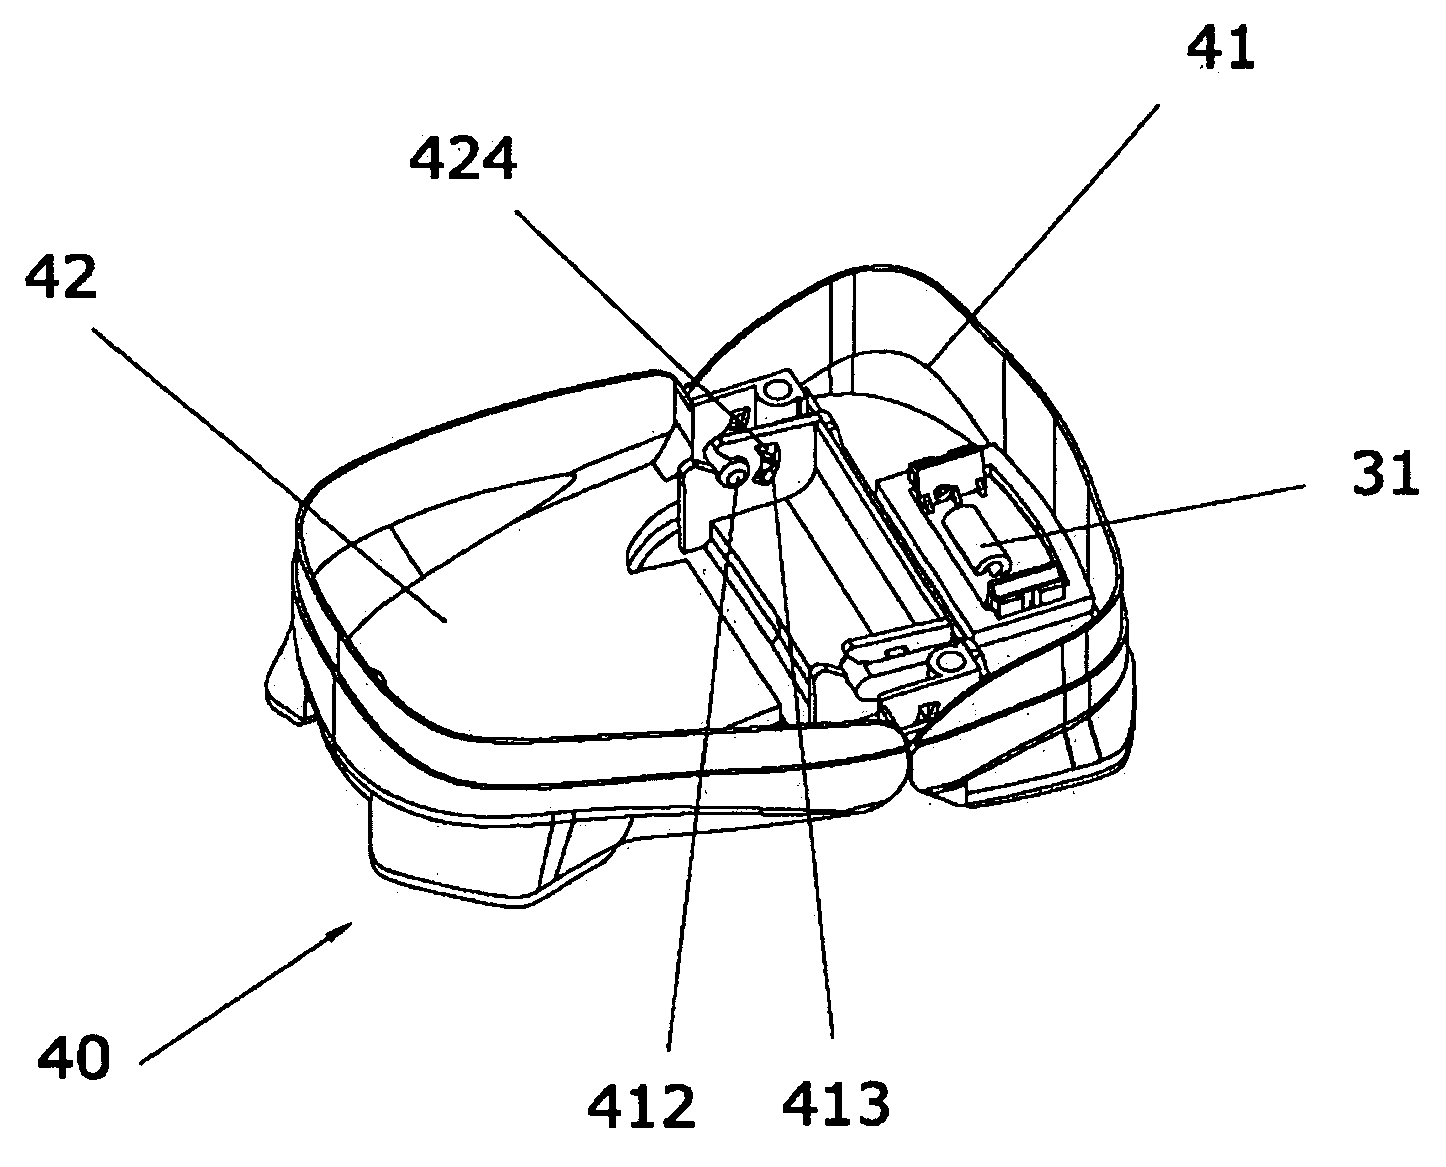 Base structure of golf club bag